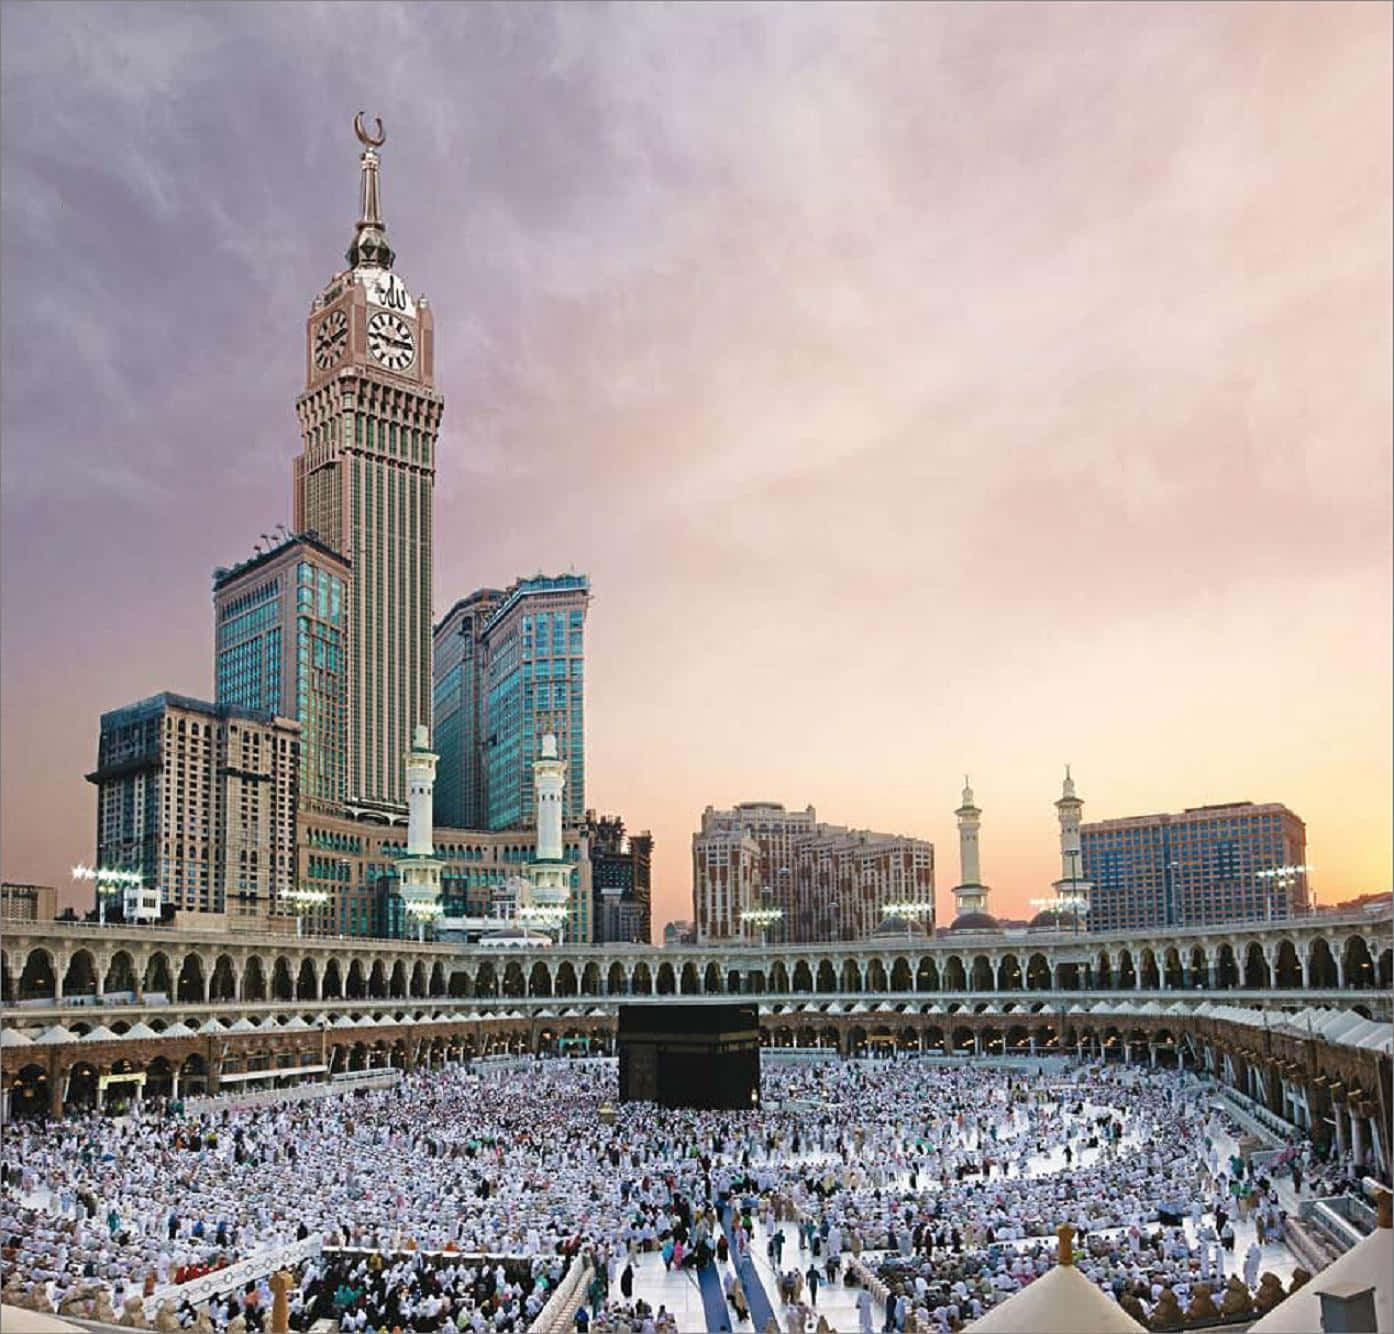 Majestic view of Makkah's Grand Mosque featuring the iconic Kaaba.